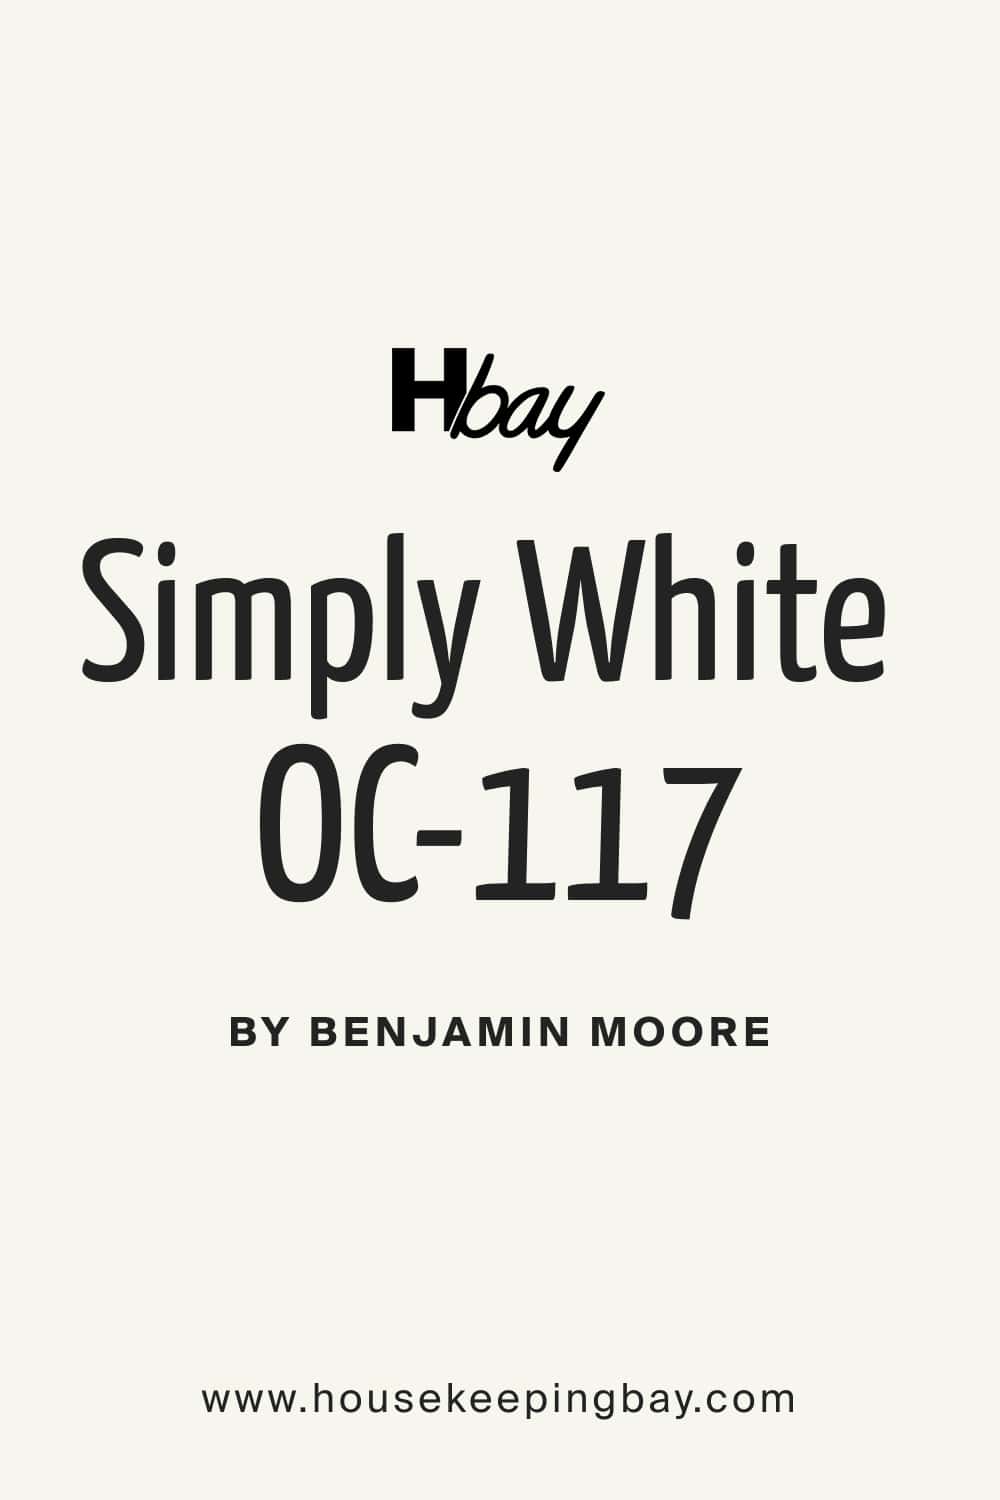 Simply White OC 117 by Benjamin Moore